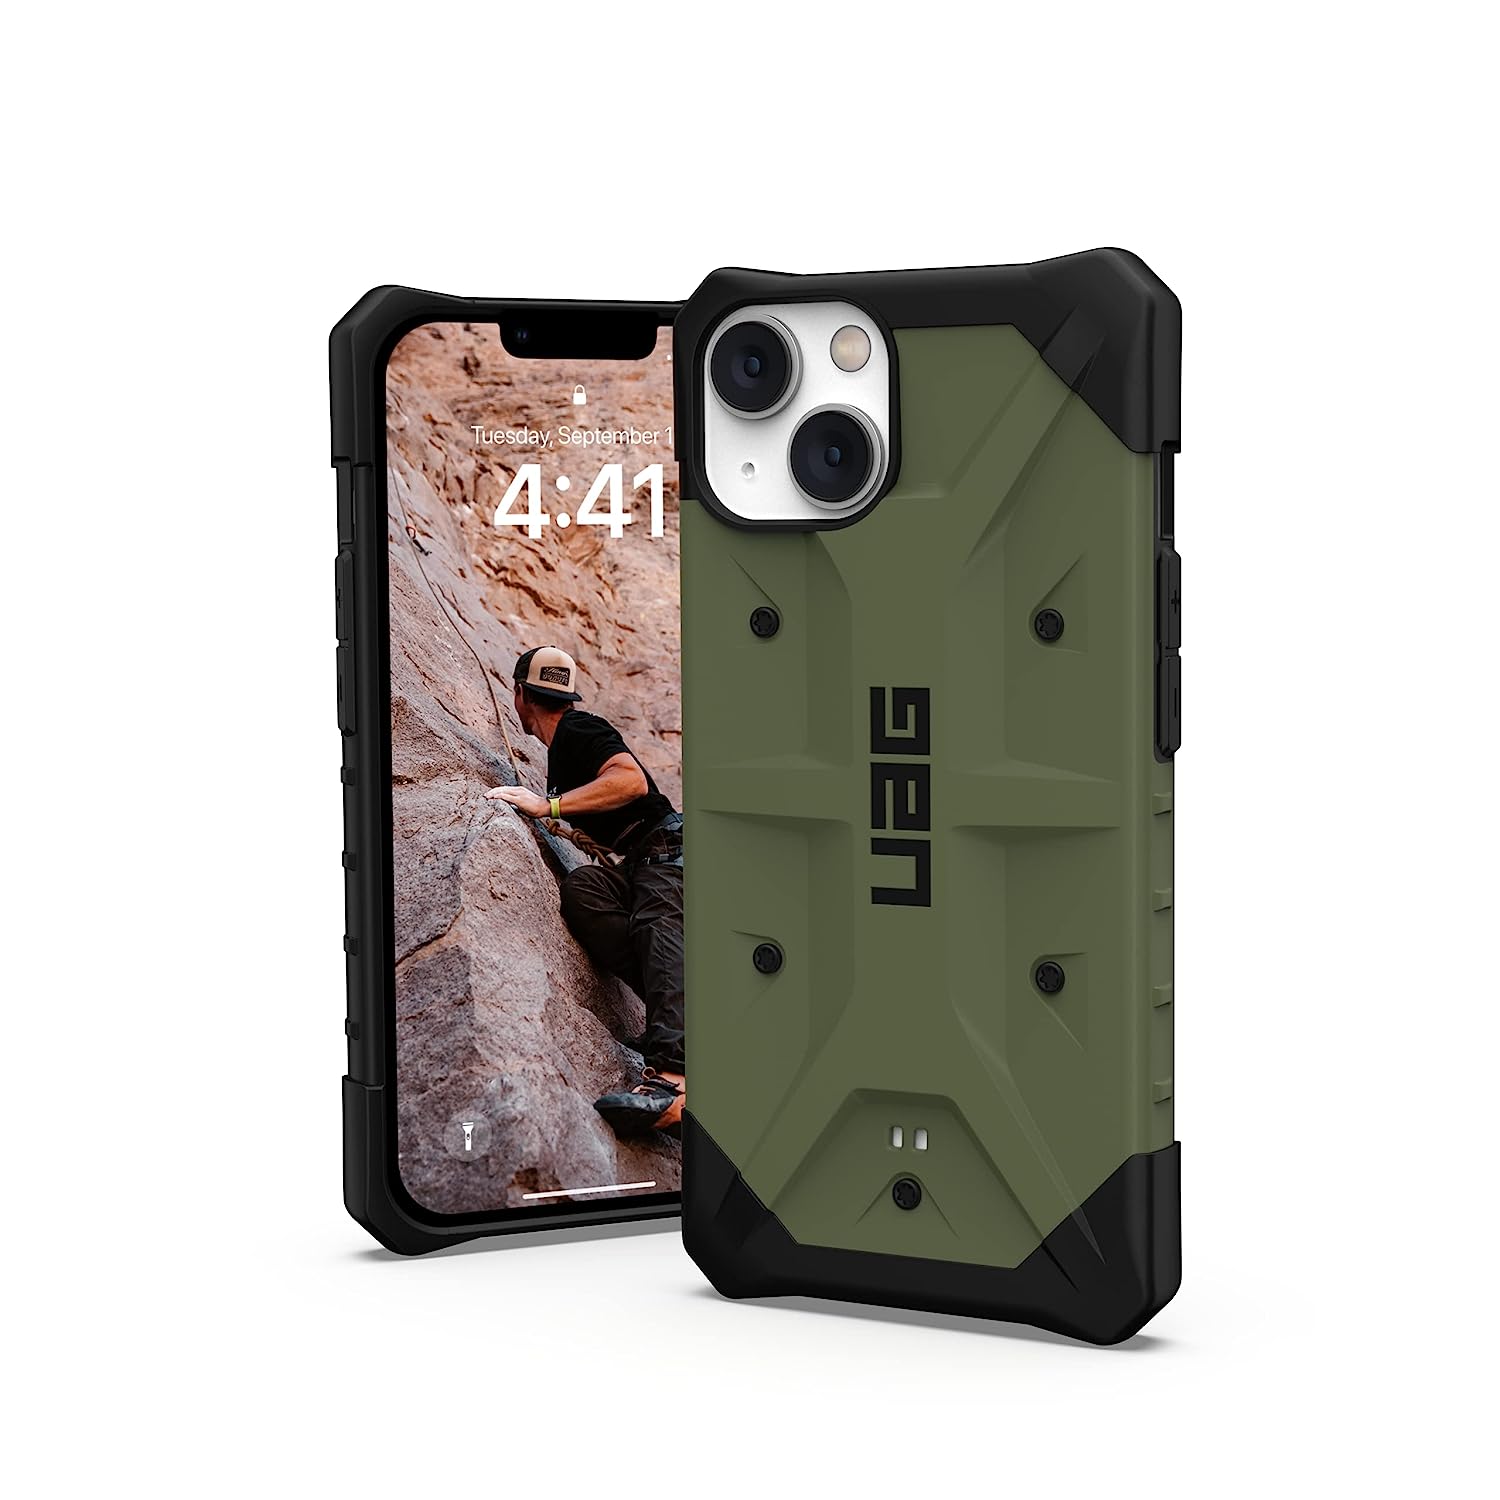 iPhone 12 Pro Max Armor Cover | Original Urban Armor Slim Fit Rugged Protective Case/Cover Designed For Apple iPhone 12 Pro Max UAG Olive